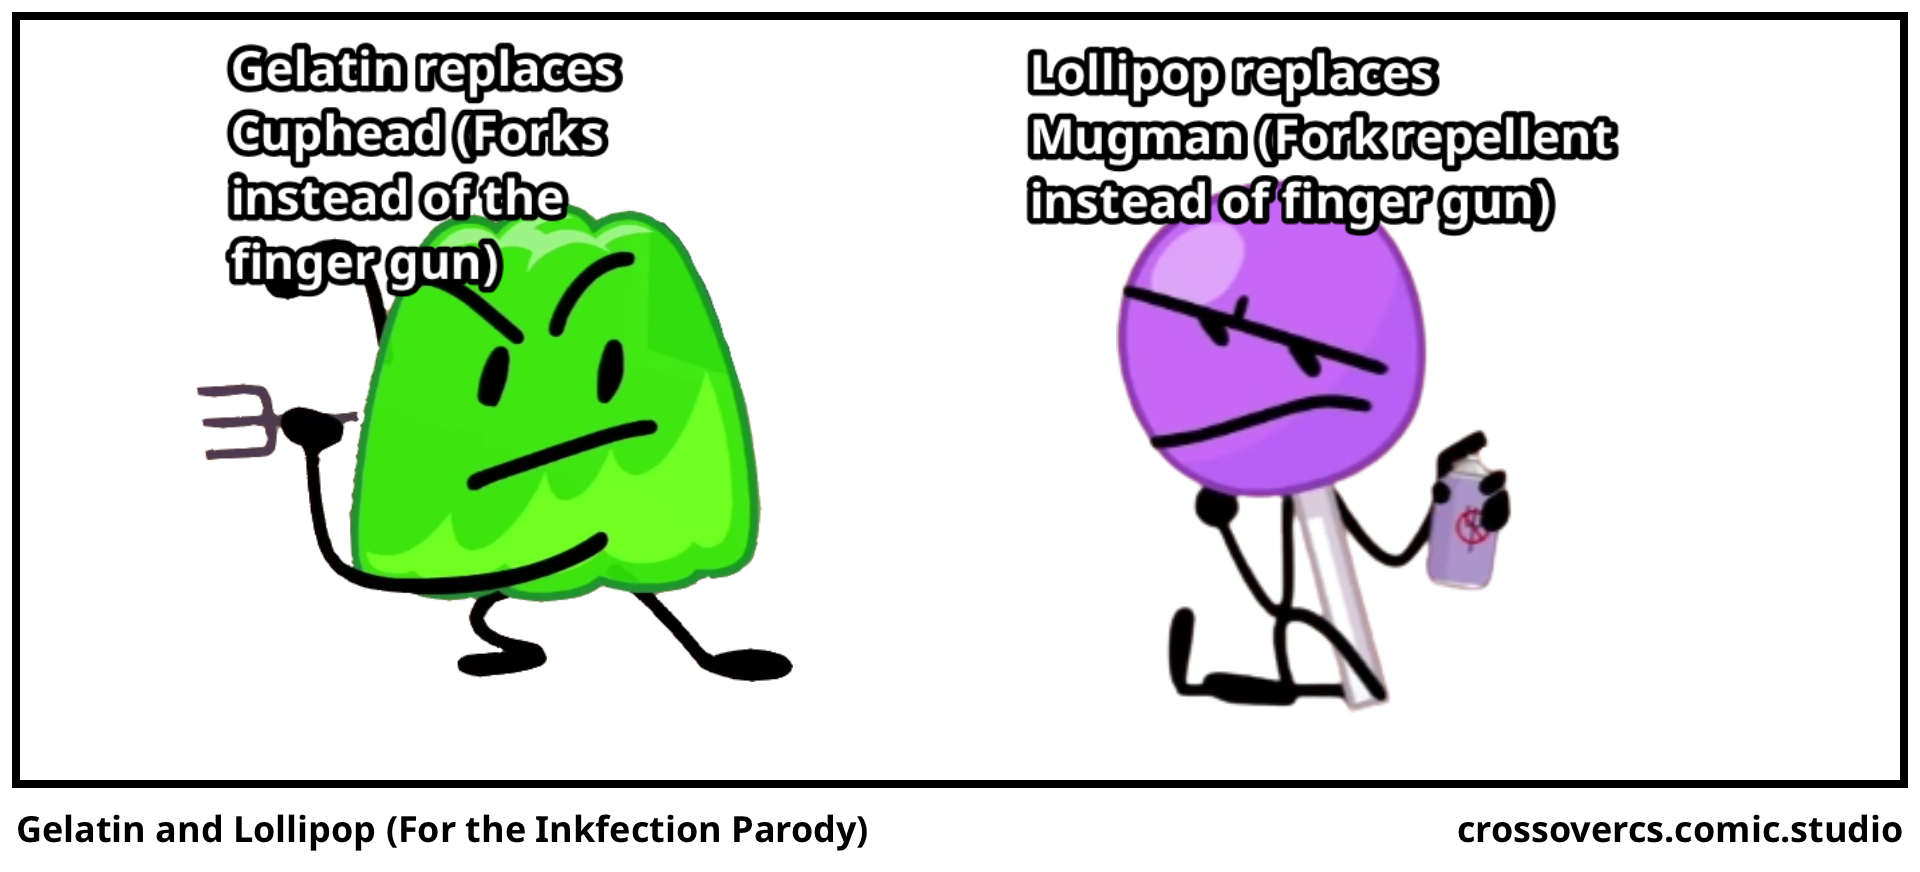 Gelatin and Lollipop (For the Inkfection Parody) 